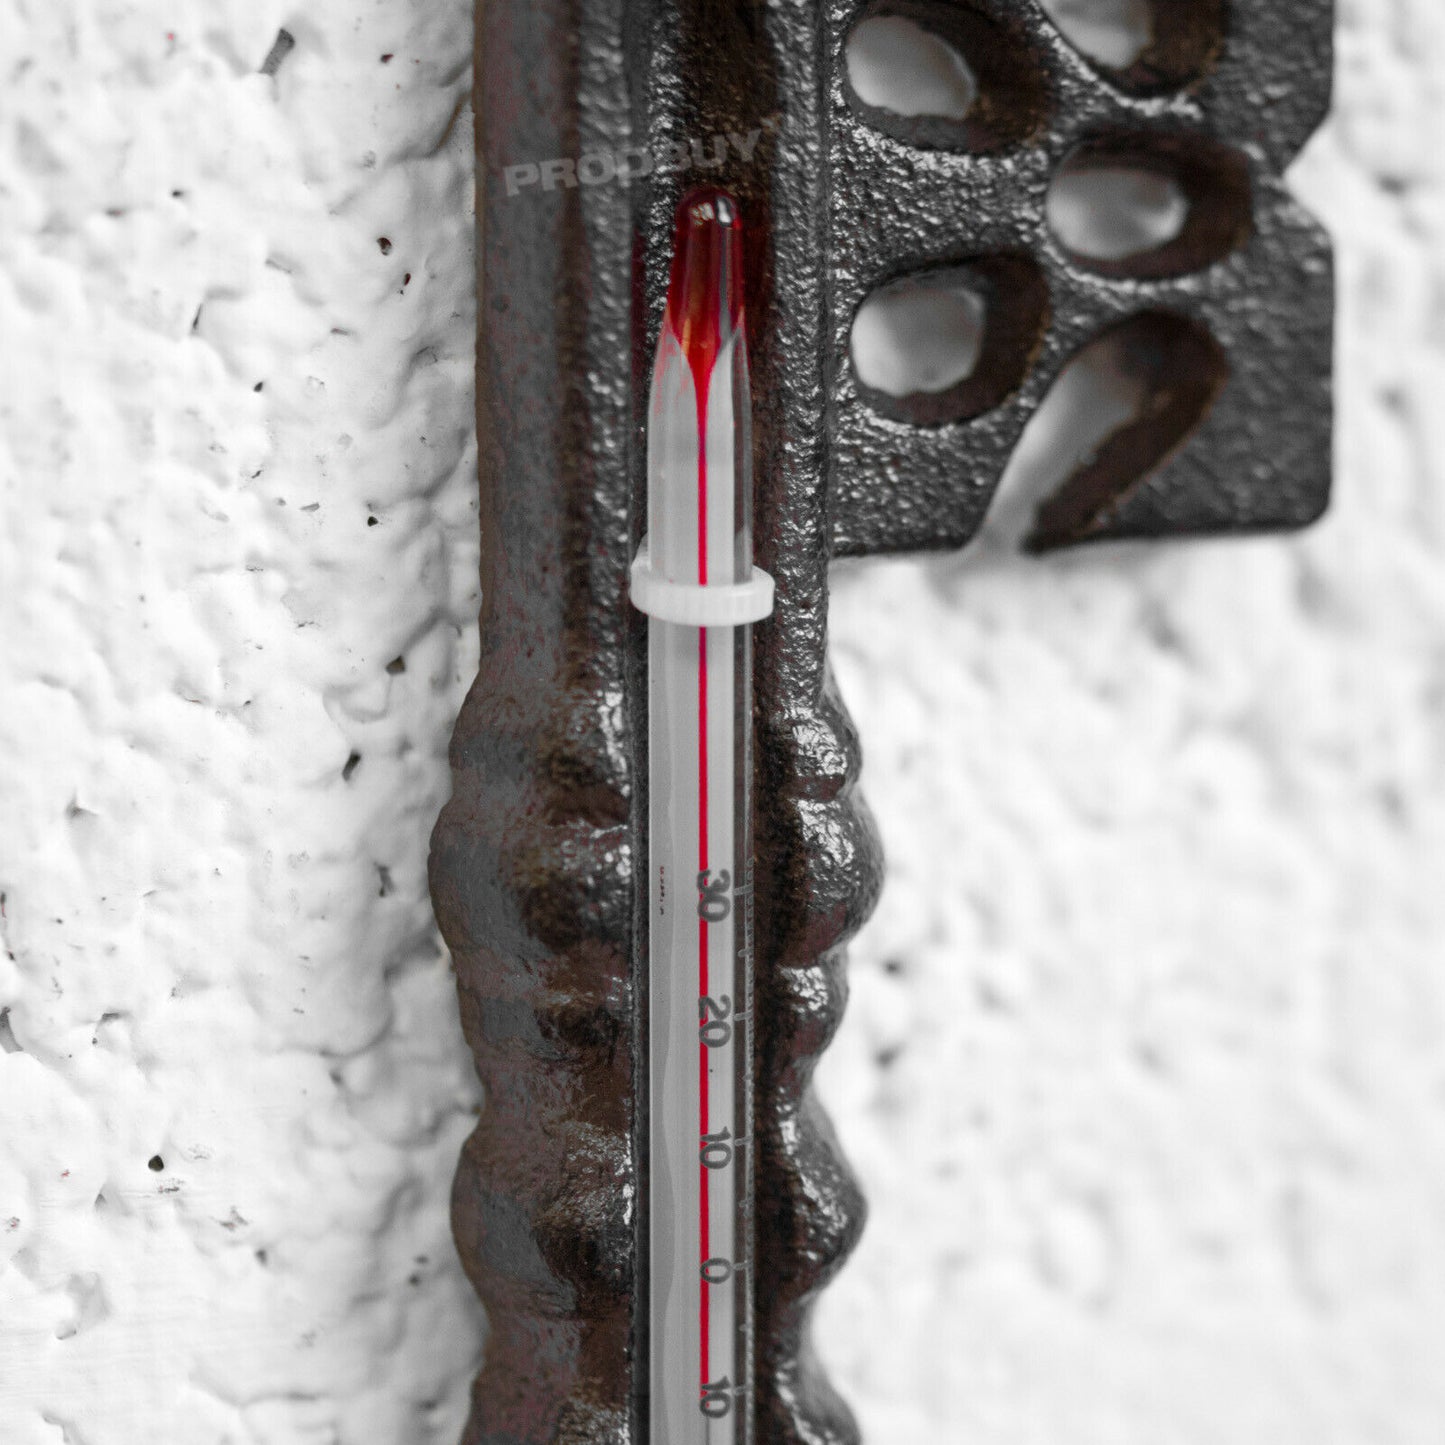 Cast Iron Key Thermometer Wall Hanging Ornament